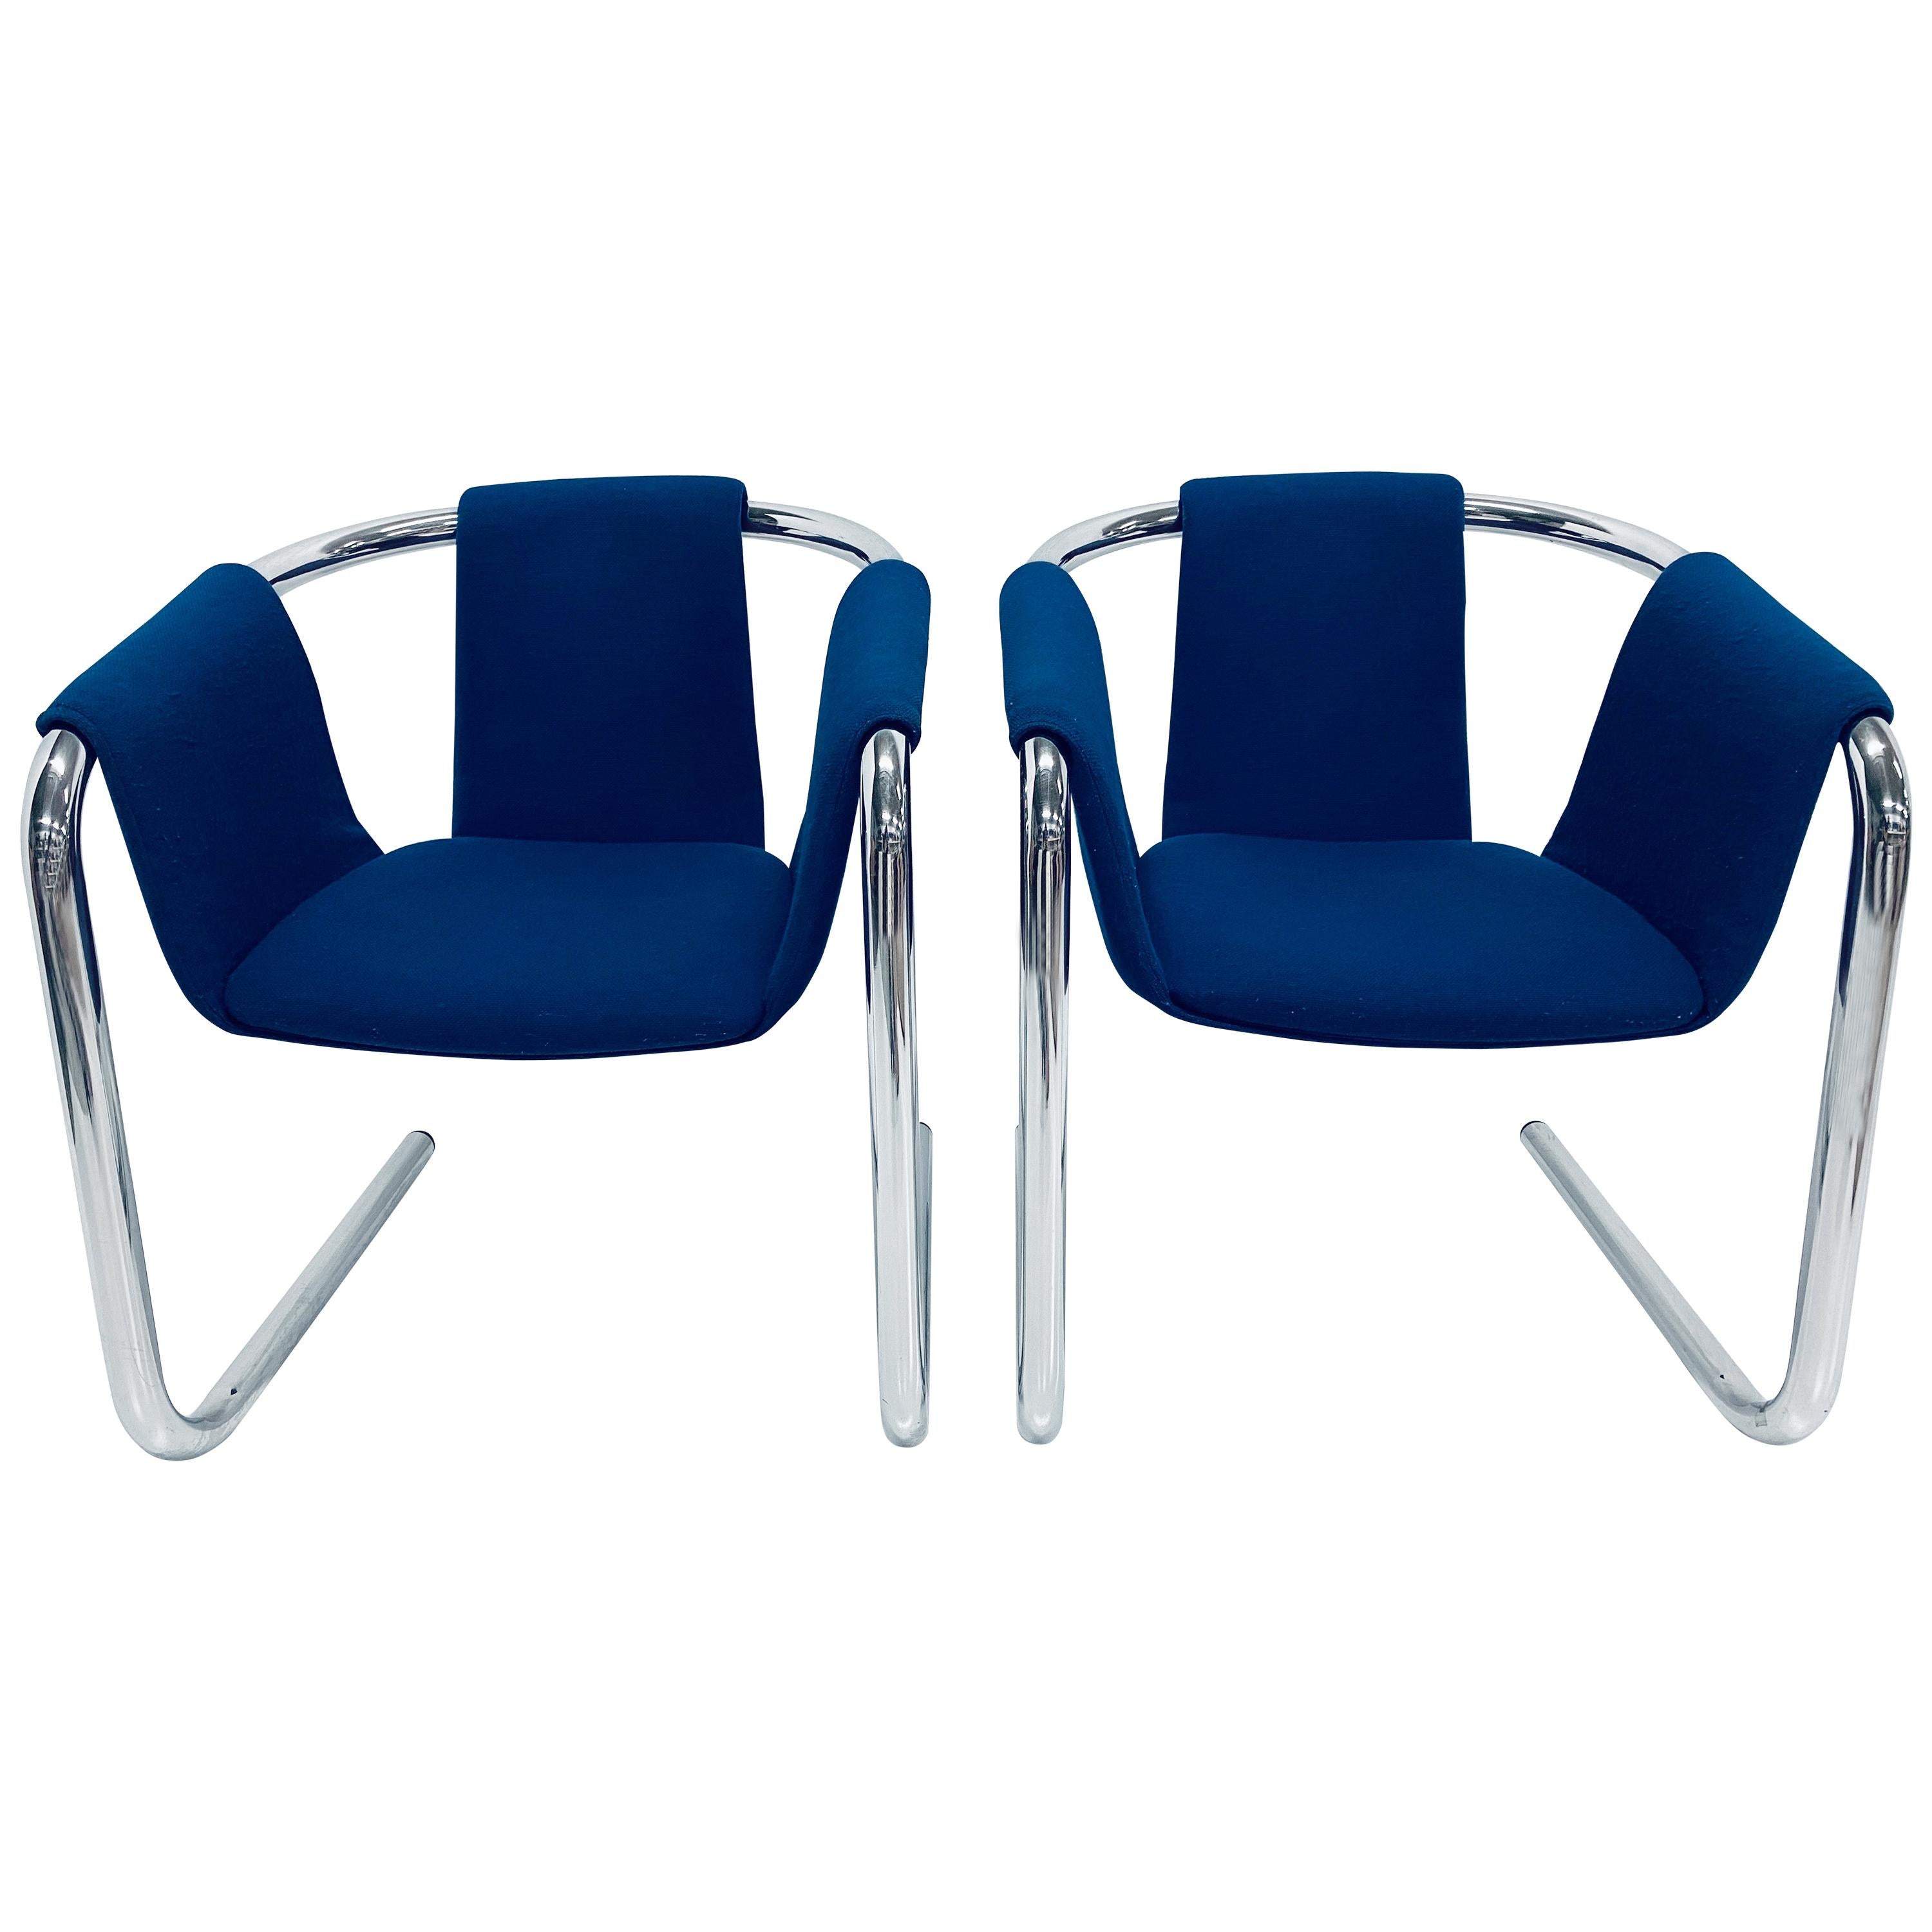 Pair of sling armchairs by Duncan Burke and Gunter Eberle with tubular chrome cantilevered frame and blue wool fabric cushioned seat. The seat is suspended from the tubular frame. Manufactured by Vecta.

The fabric is in original condition with no